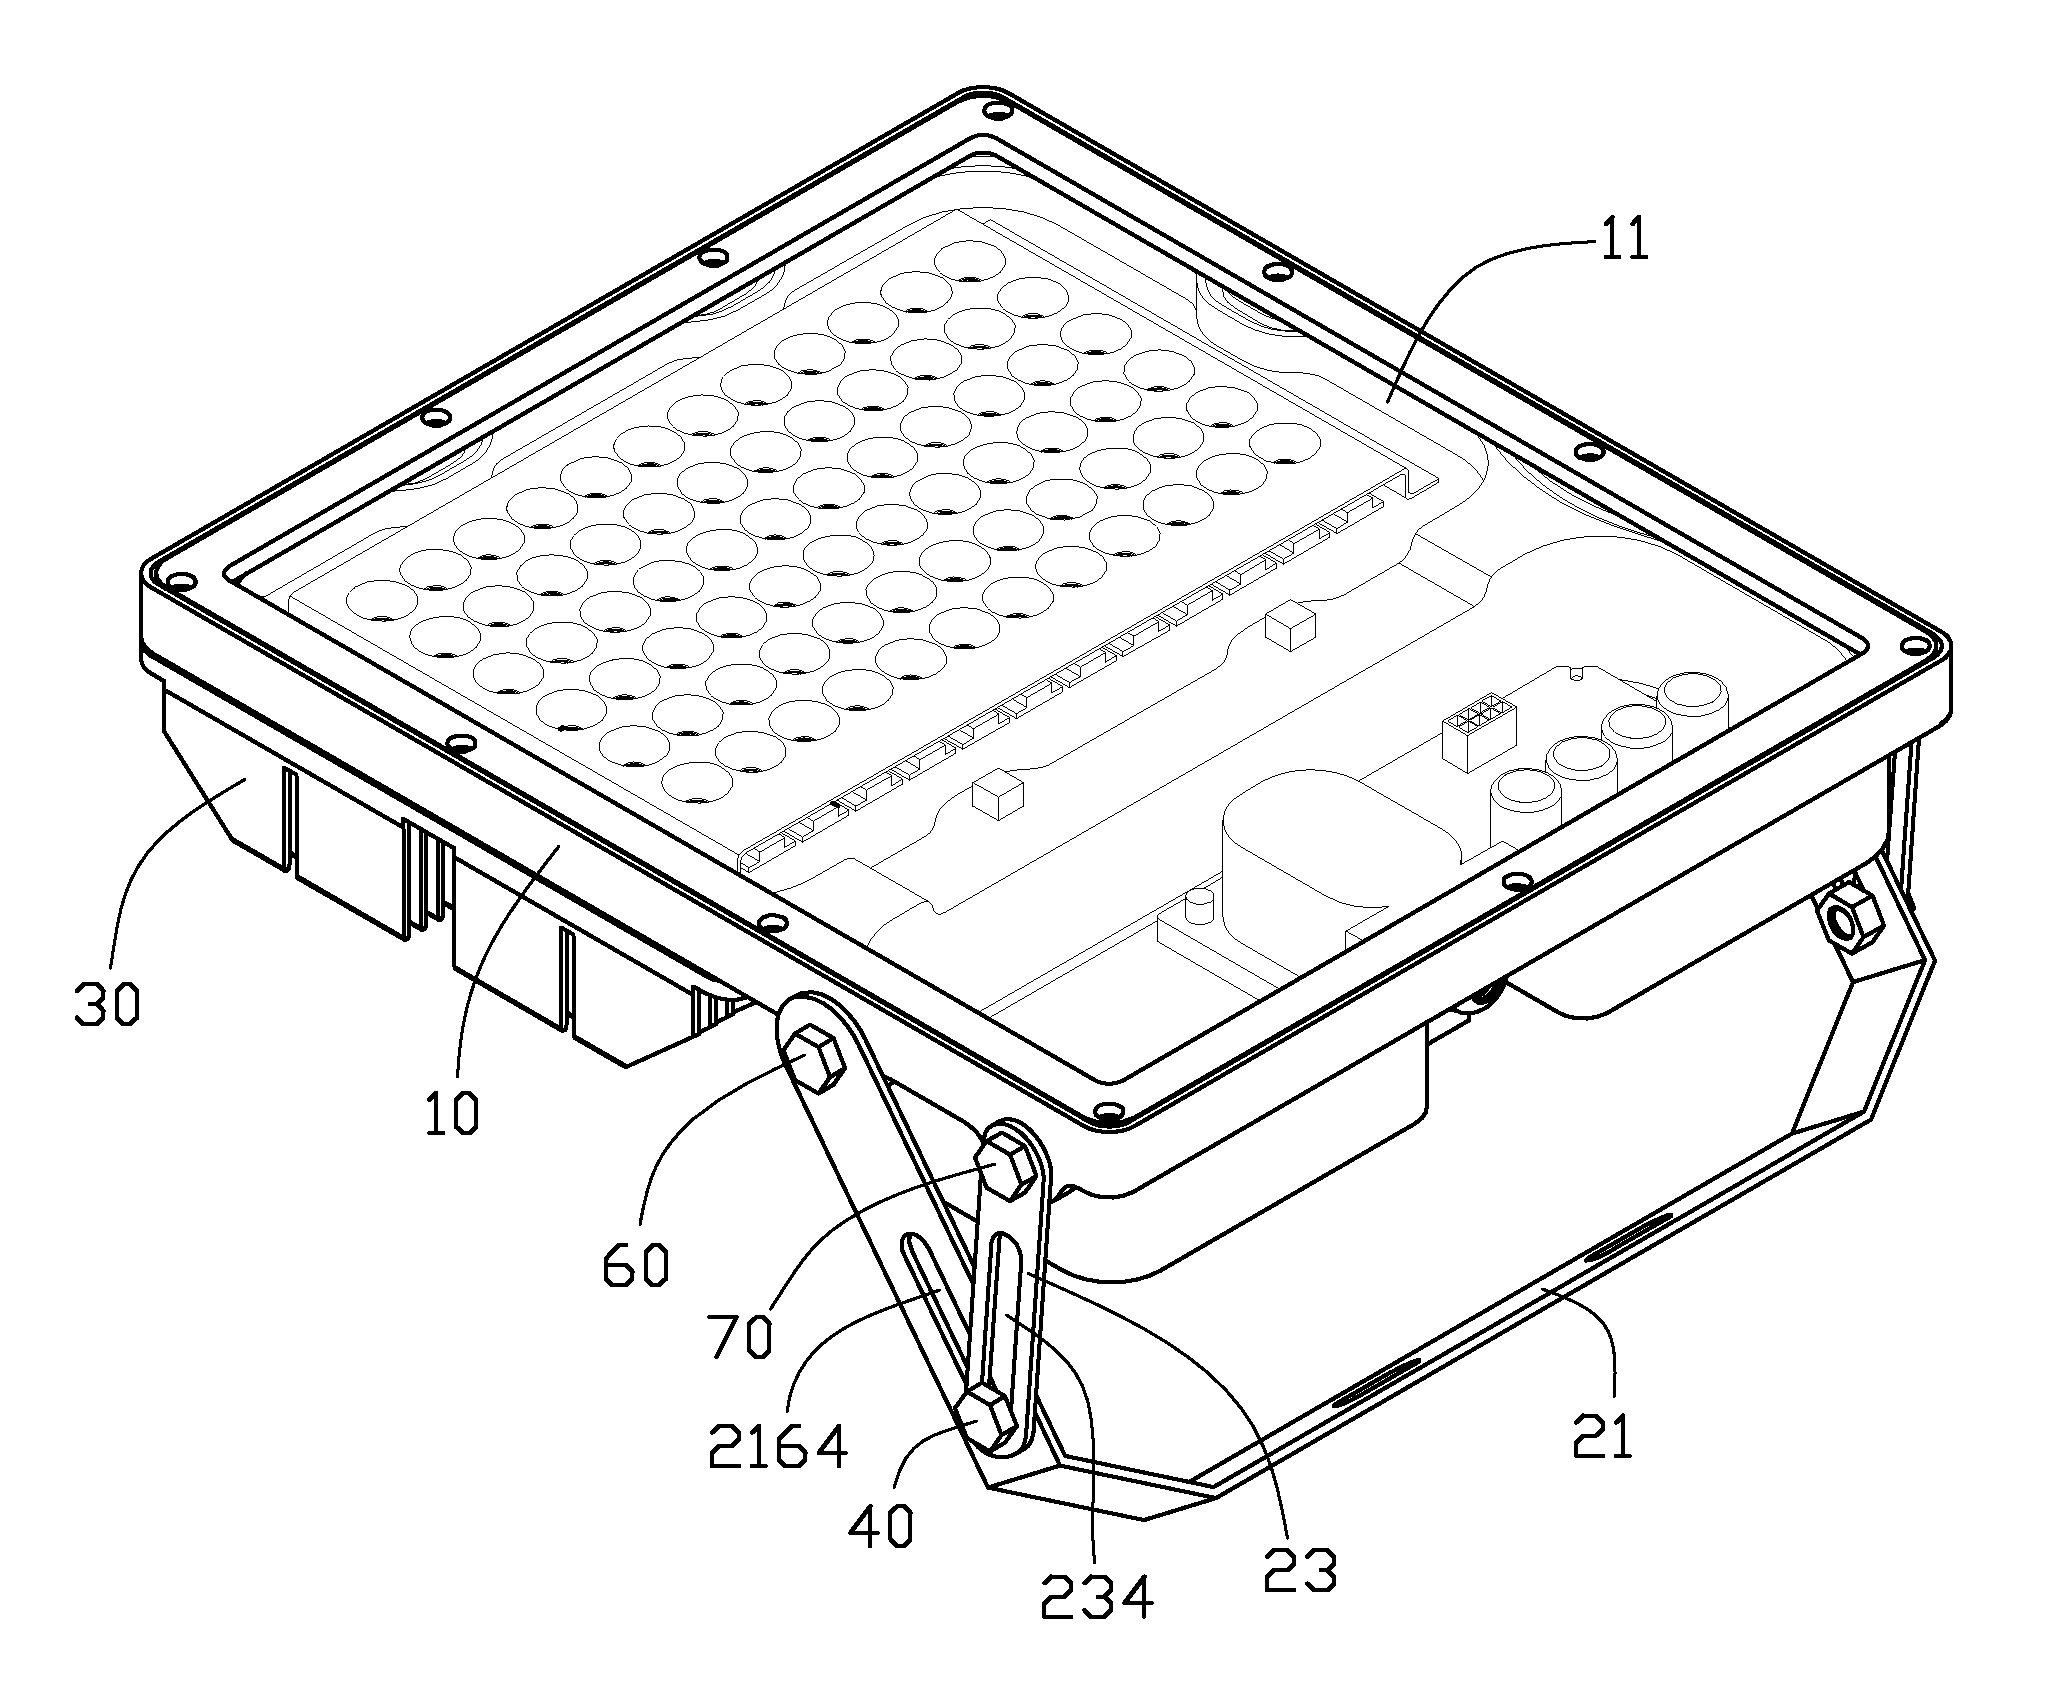 Flood lamp assembly having a reinforced bracket for supporting a weight thereof